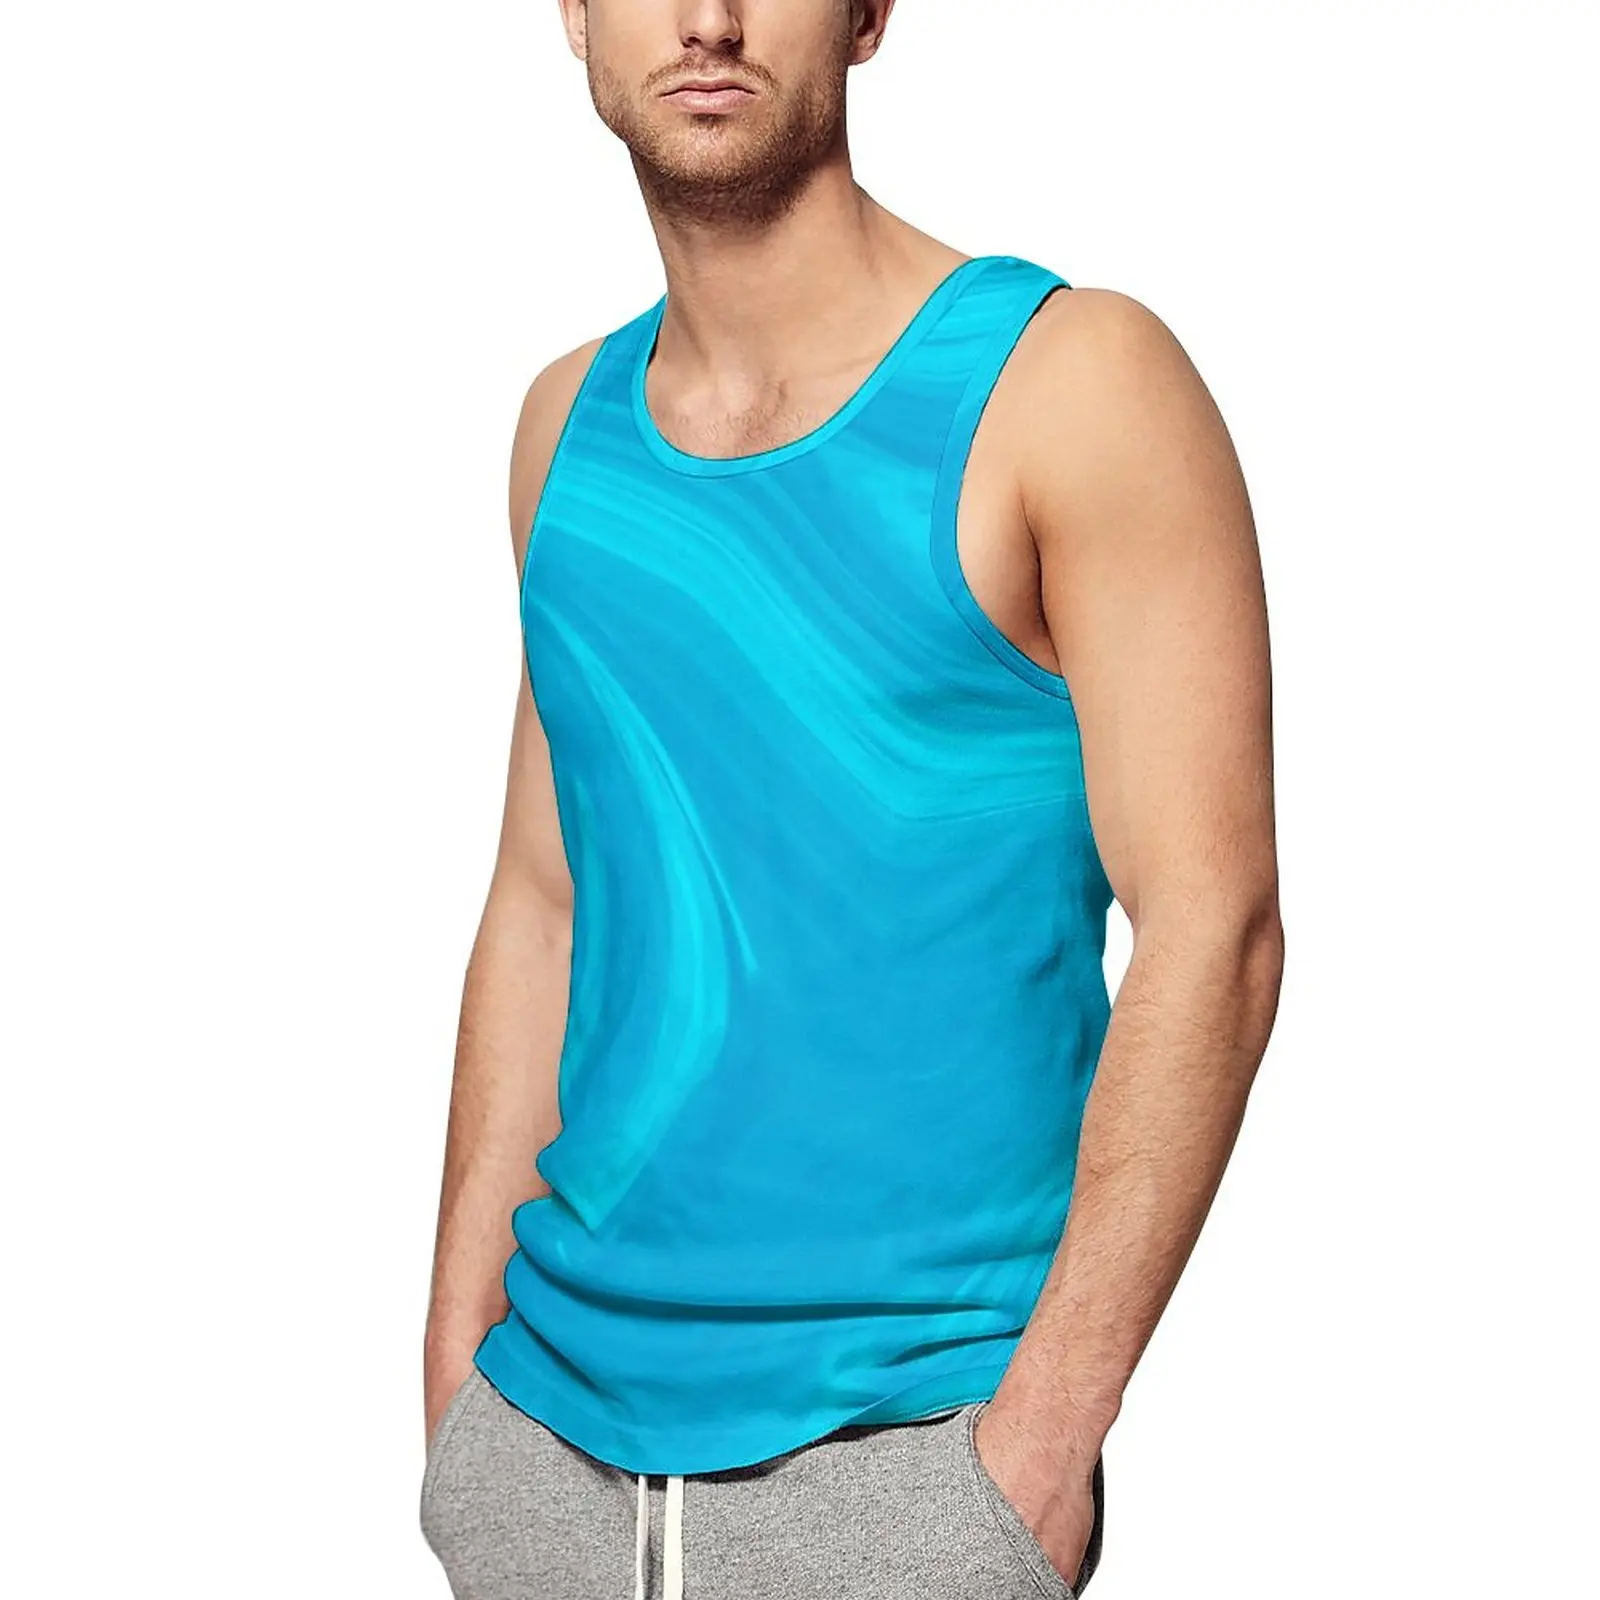 

Blue Marble Beach Tank Top Abstract Print Bodybuilding Tops Man's Graphic Streetwear Sleeveless Vests Plus Size